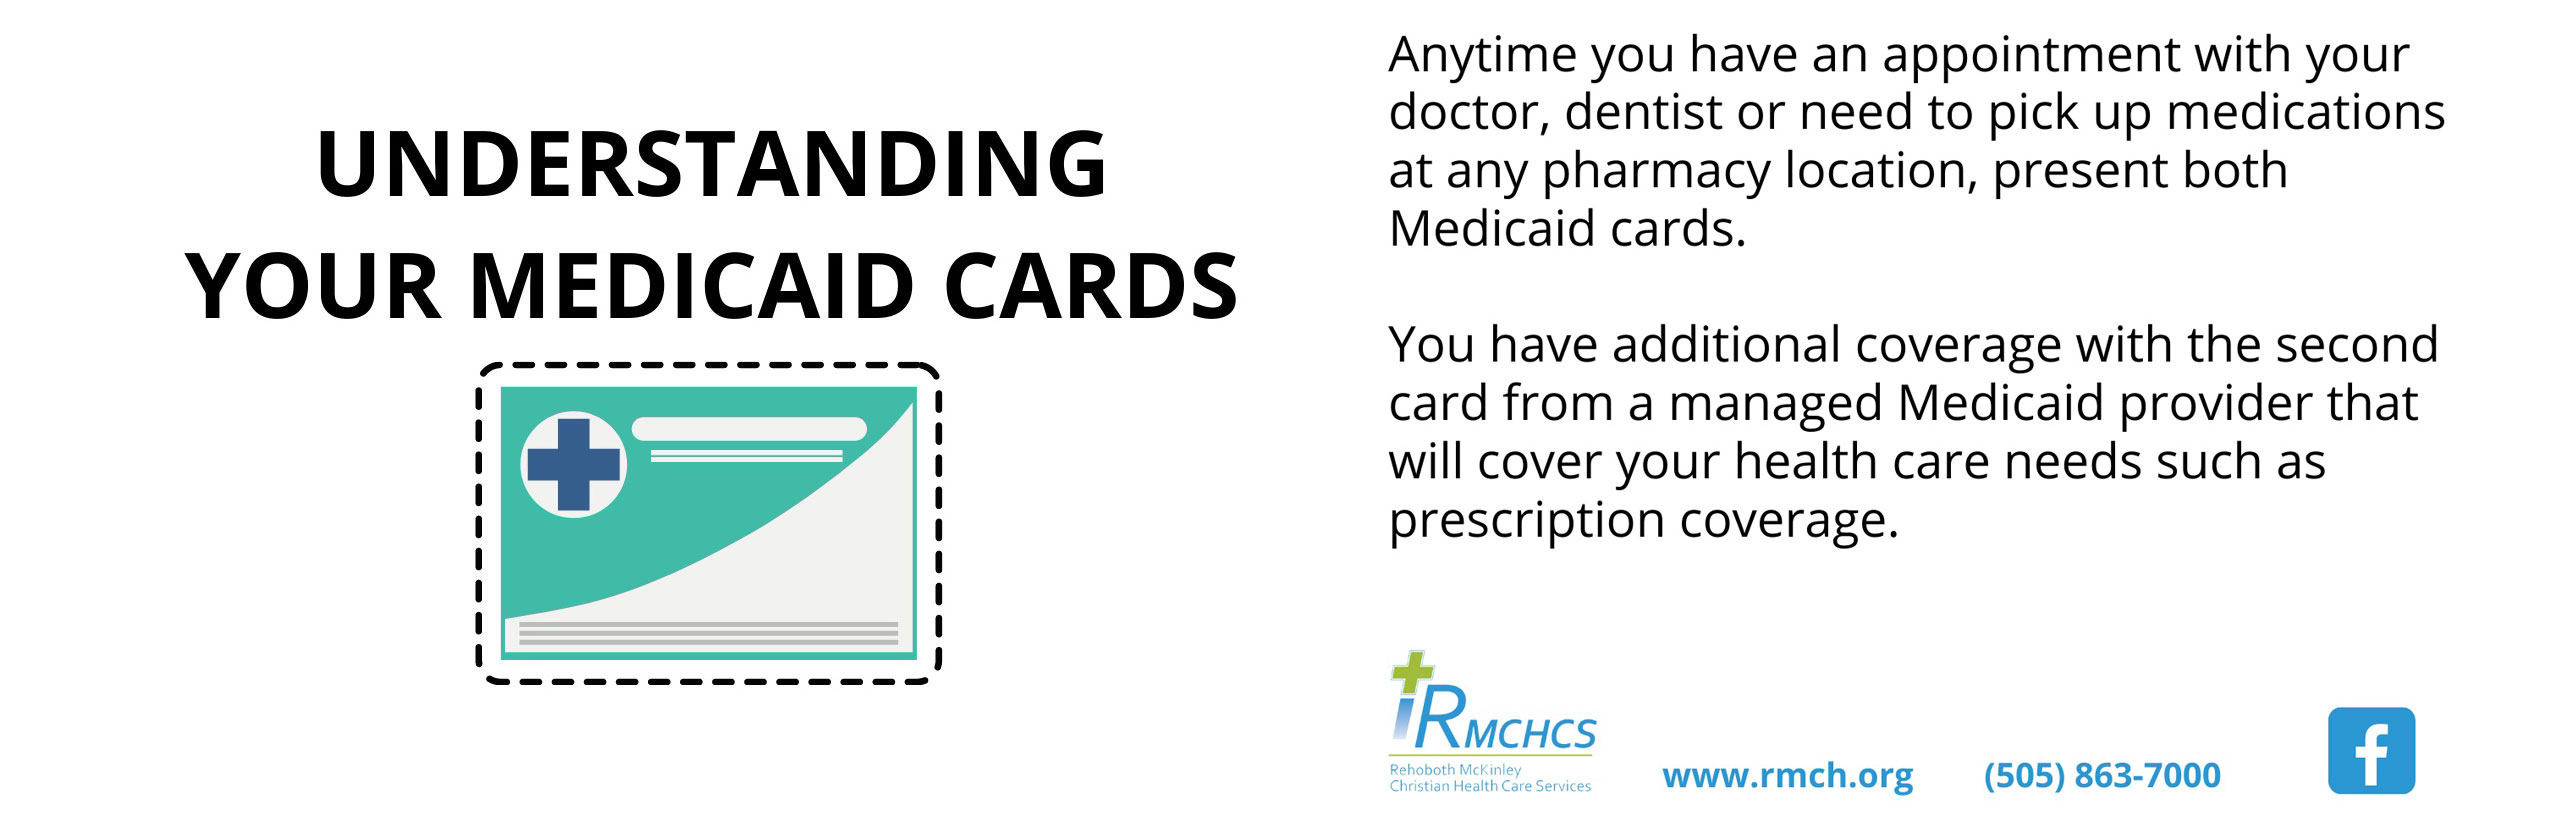 UNDERSTANDING YOUR MEDICAID CARDS

Anytime you have an appointment with your doctor, dentist or need to pick up medications at any pharmacy location, present both Medicaid cards.

You have additional coverage with the second card from a managed Medicaid provider will cover your health care needs such as prescription coverage

RMCHCS
Rehoboth McKinley Christian Health Care Services

www,rnch,org
(505) 863-7000

(facebook logo)